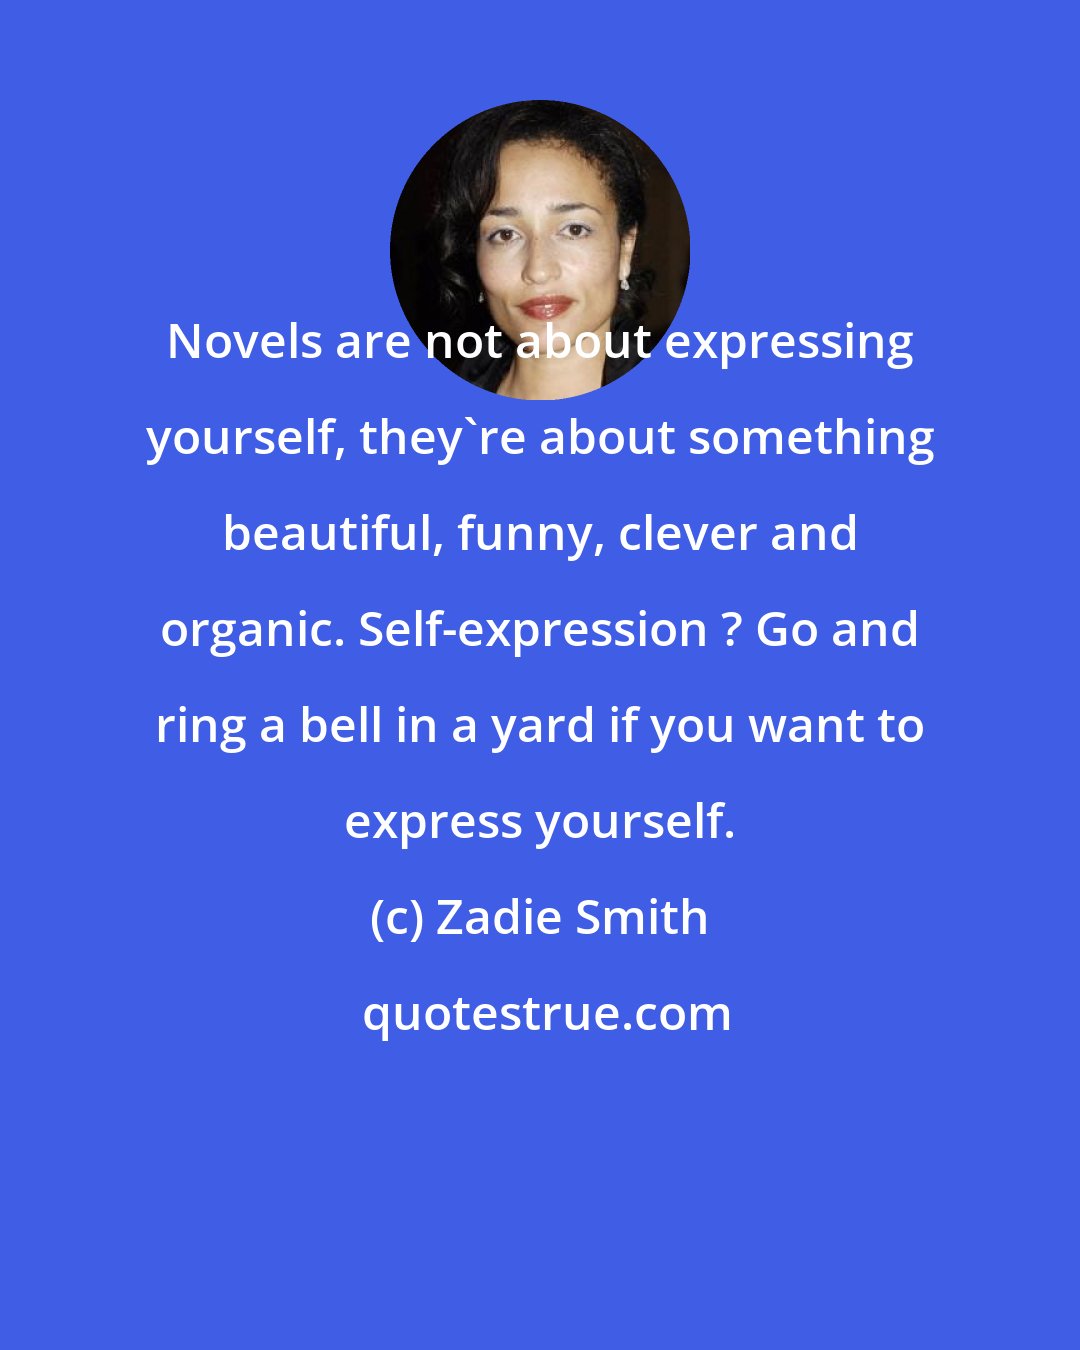 Zadie Smith: Novels are not about expressing yourself, they're about something beautiful, funny, clever and organic. Self-expression ? Go and ring a bell in a yard if you want to express yourself.